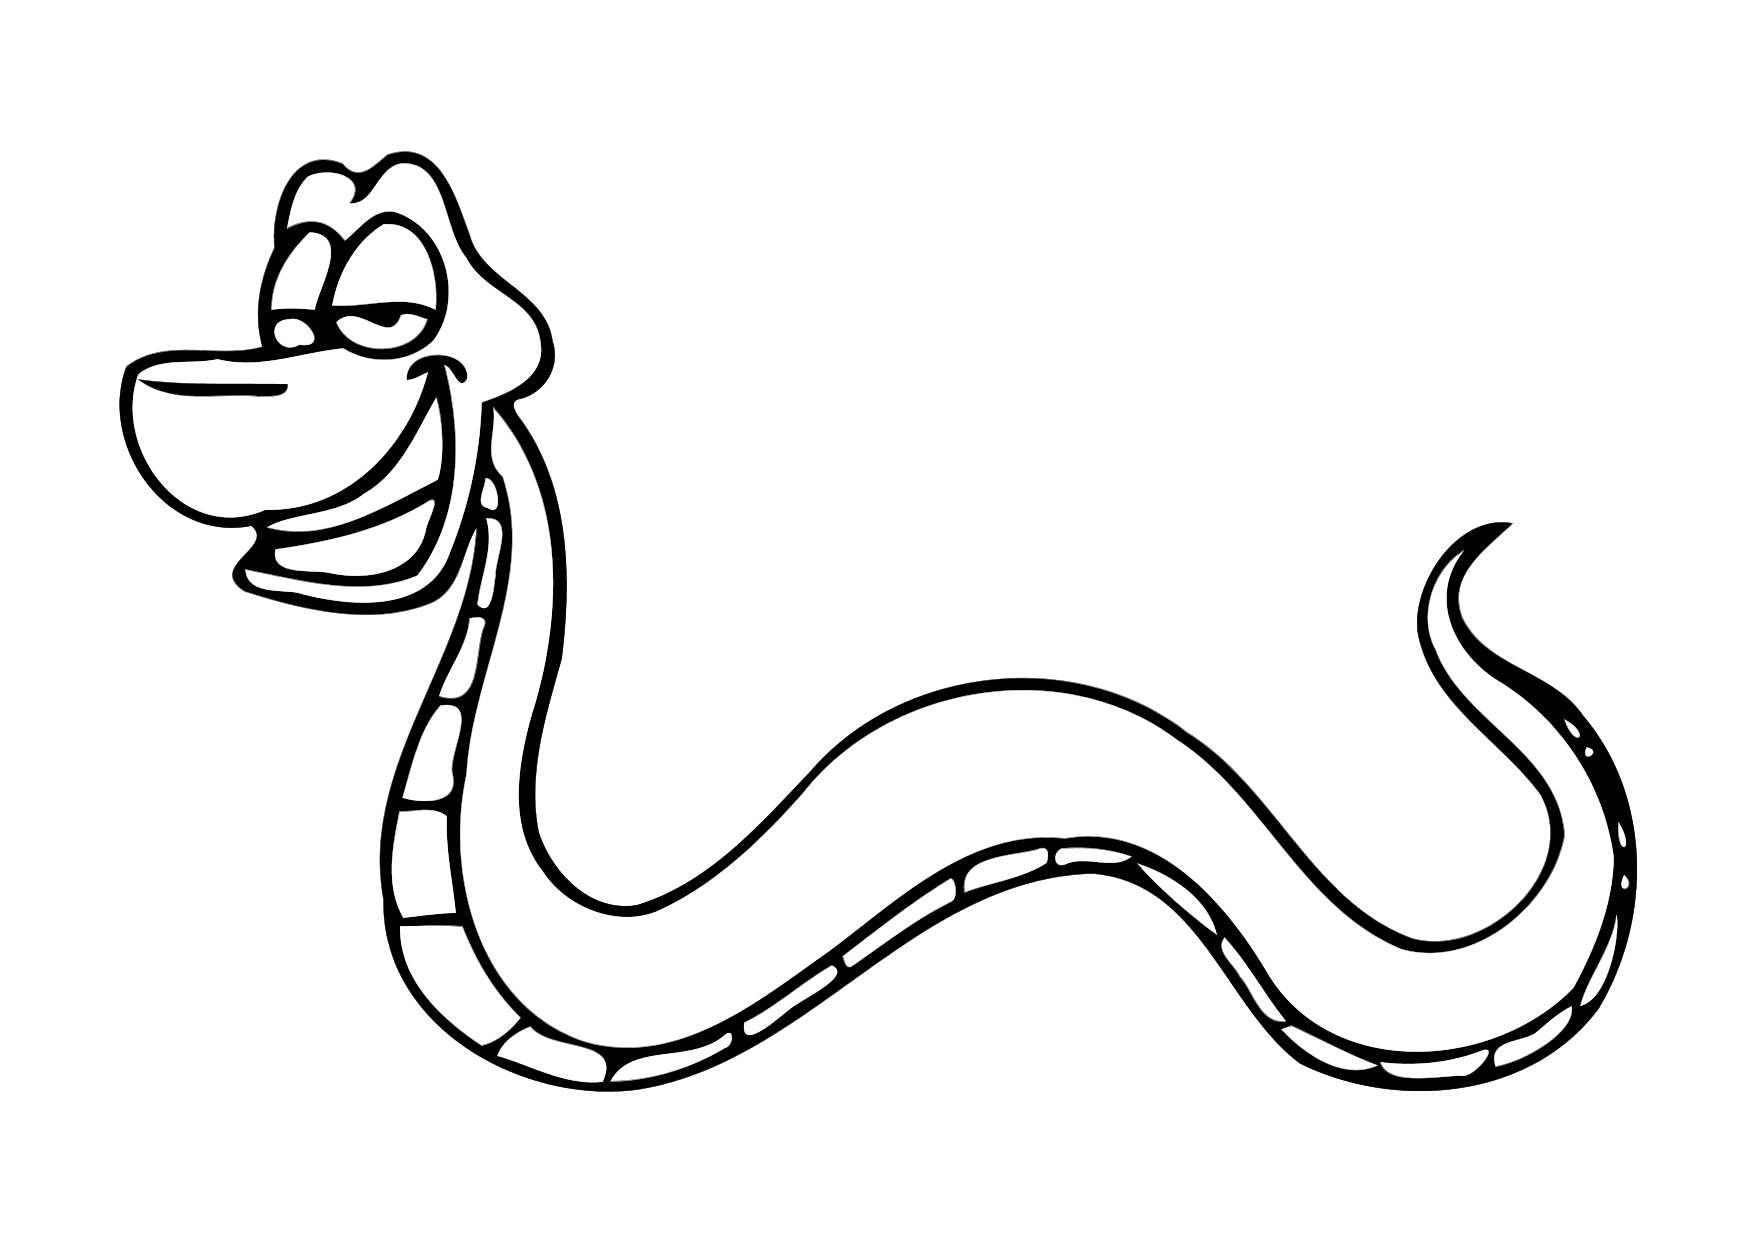 Snake Coloring Pages (8) - Coloring Kids